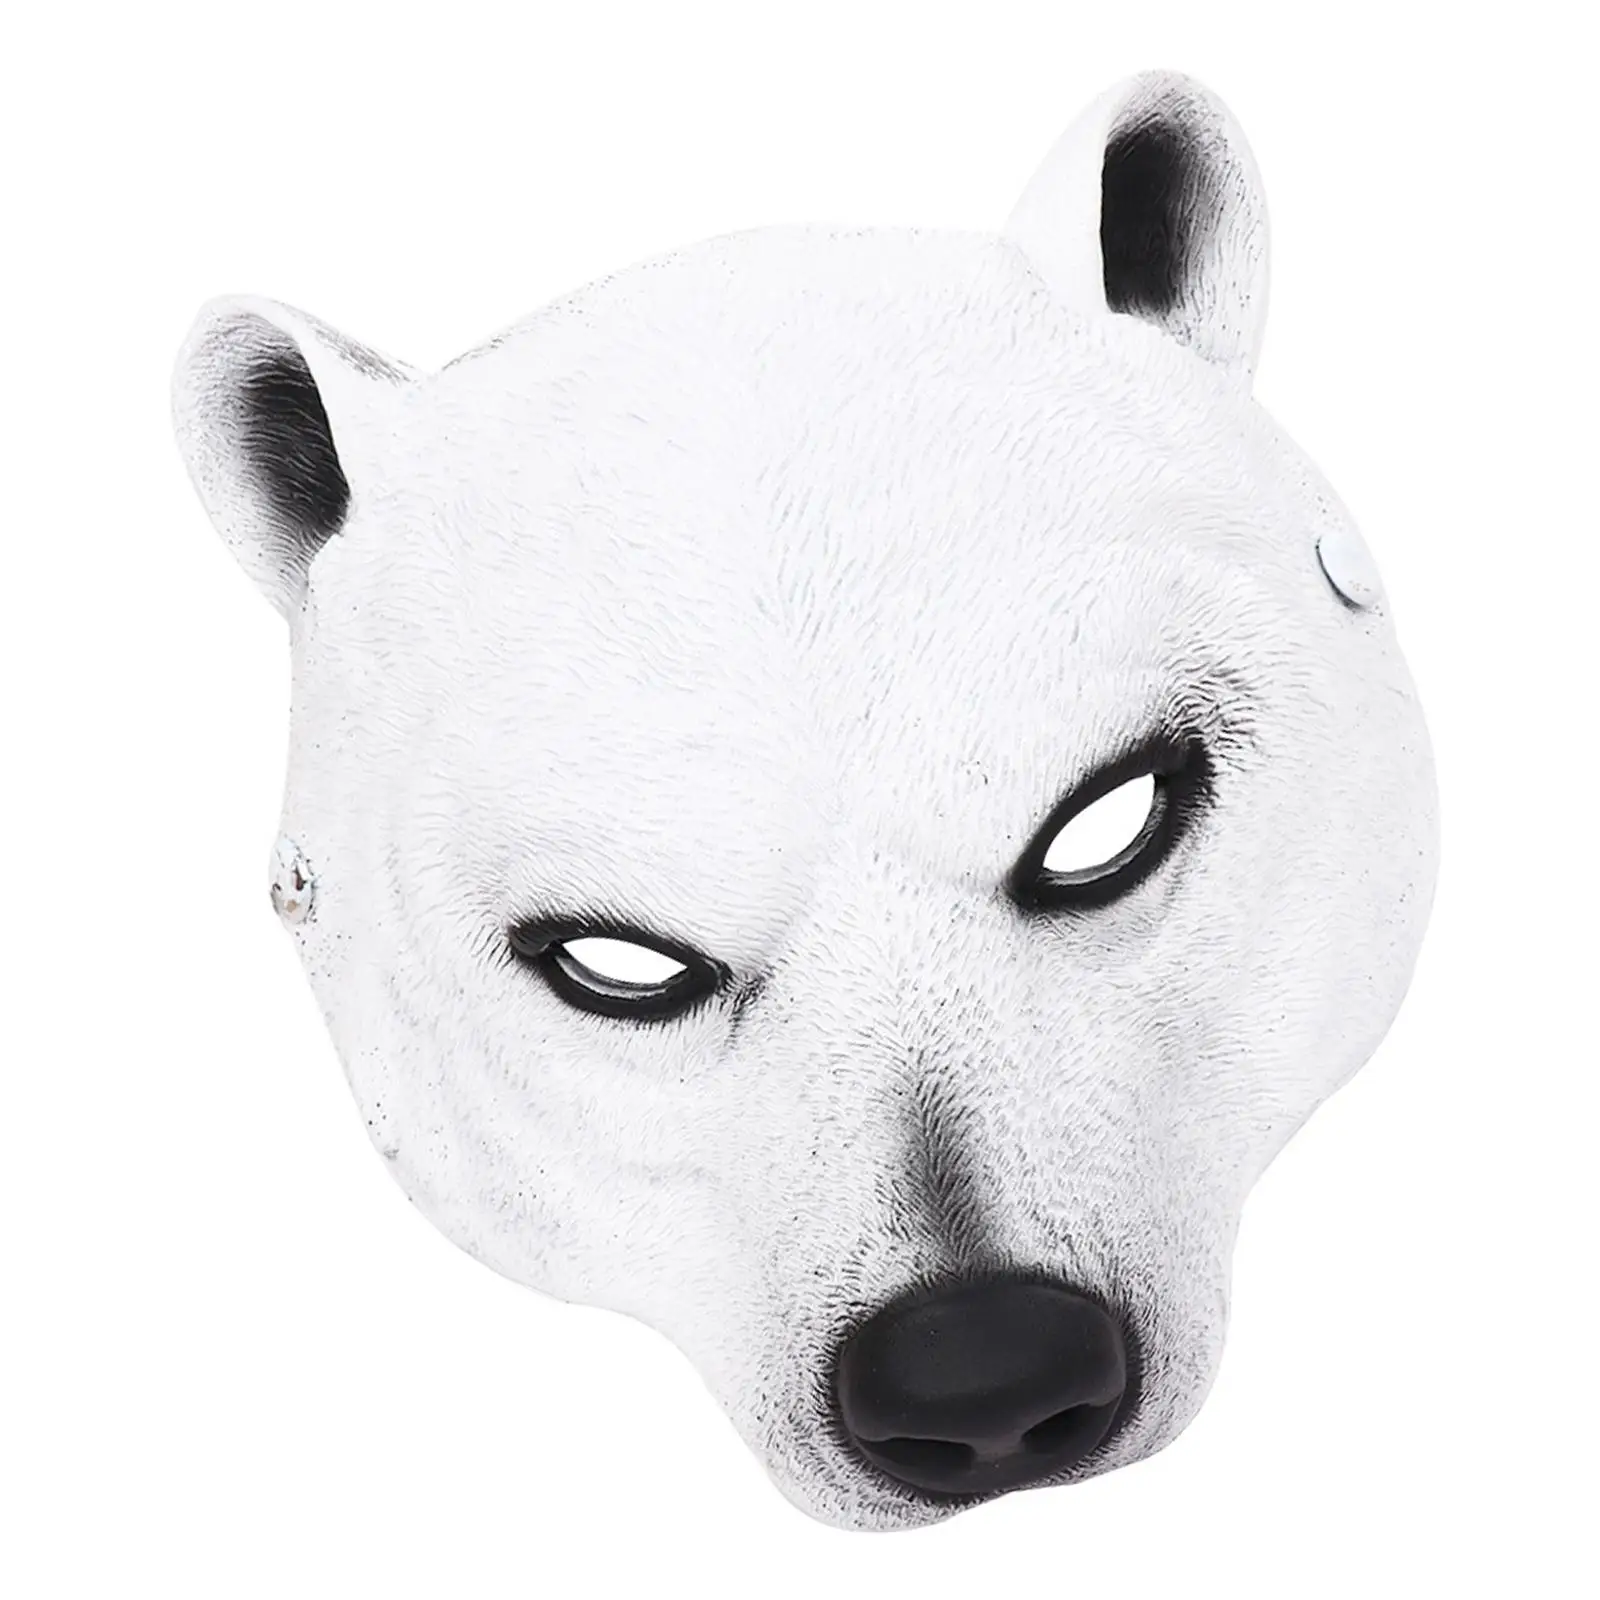 3D Halloween Bear Mask Lightweight Realistic Facial Cover Novelty Half Face Mask for Festival Costume Masquerade Party Props